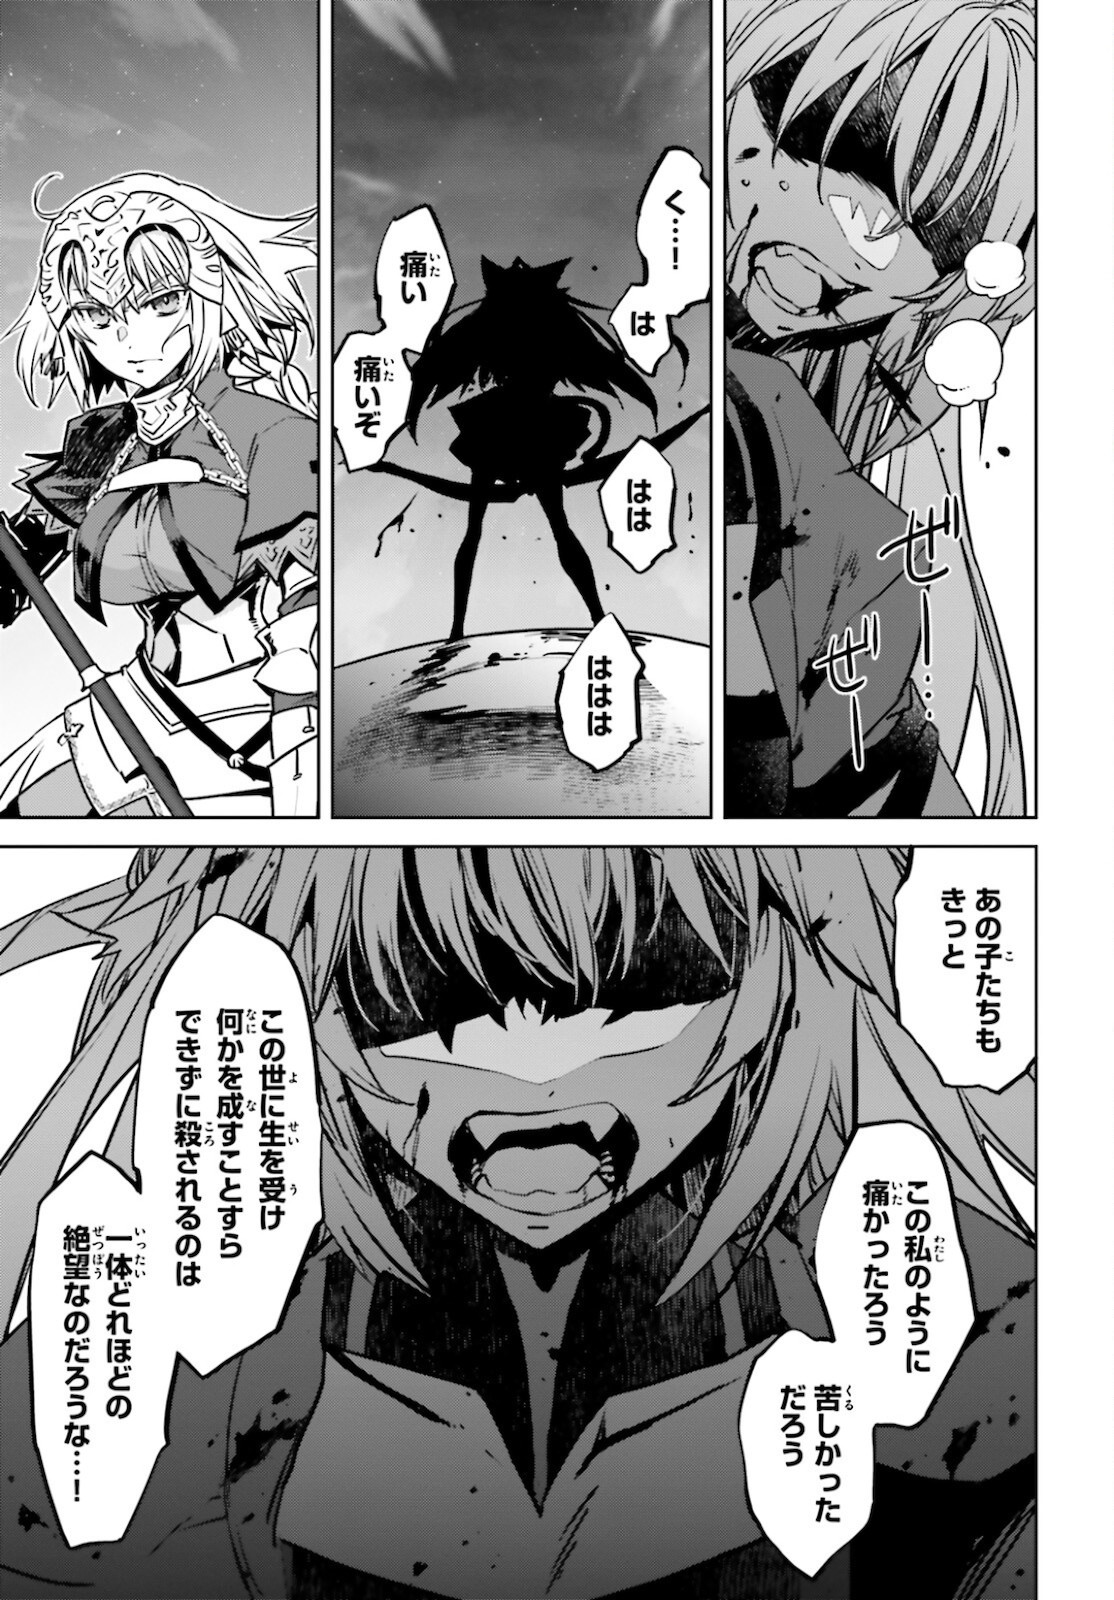 Fate-Apocrypha - Chapter 55-1 - Page 3